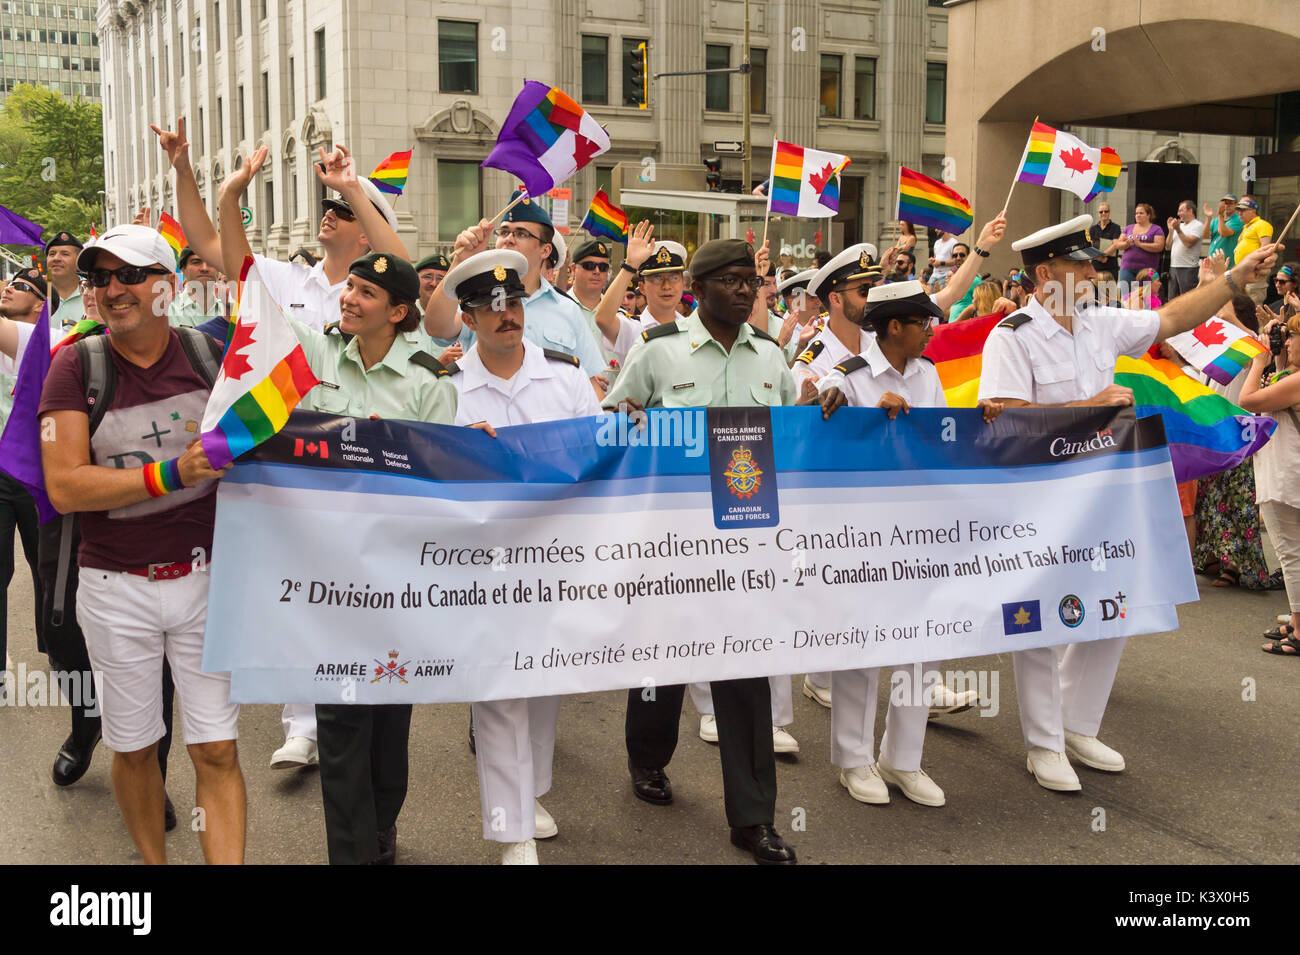 Montreal, Canada - 20 August 2017: Seconda Divisione canadese e Joint Task Force da forze armate canadesi a Montreal Gay Pride Parade Foto Stock